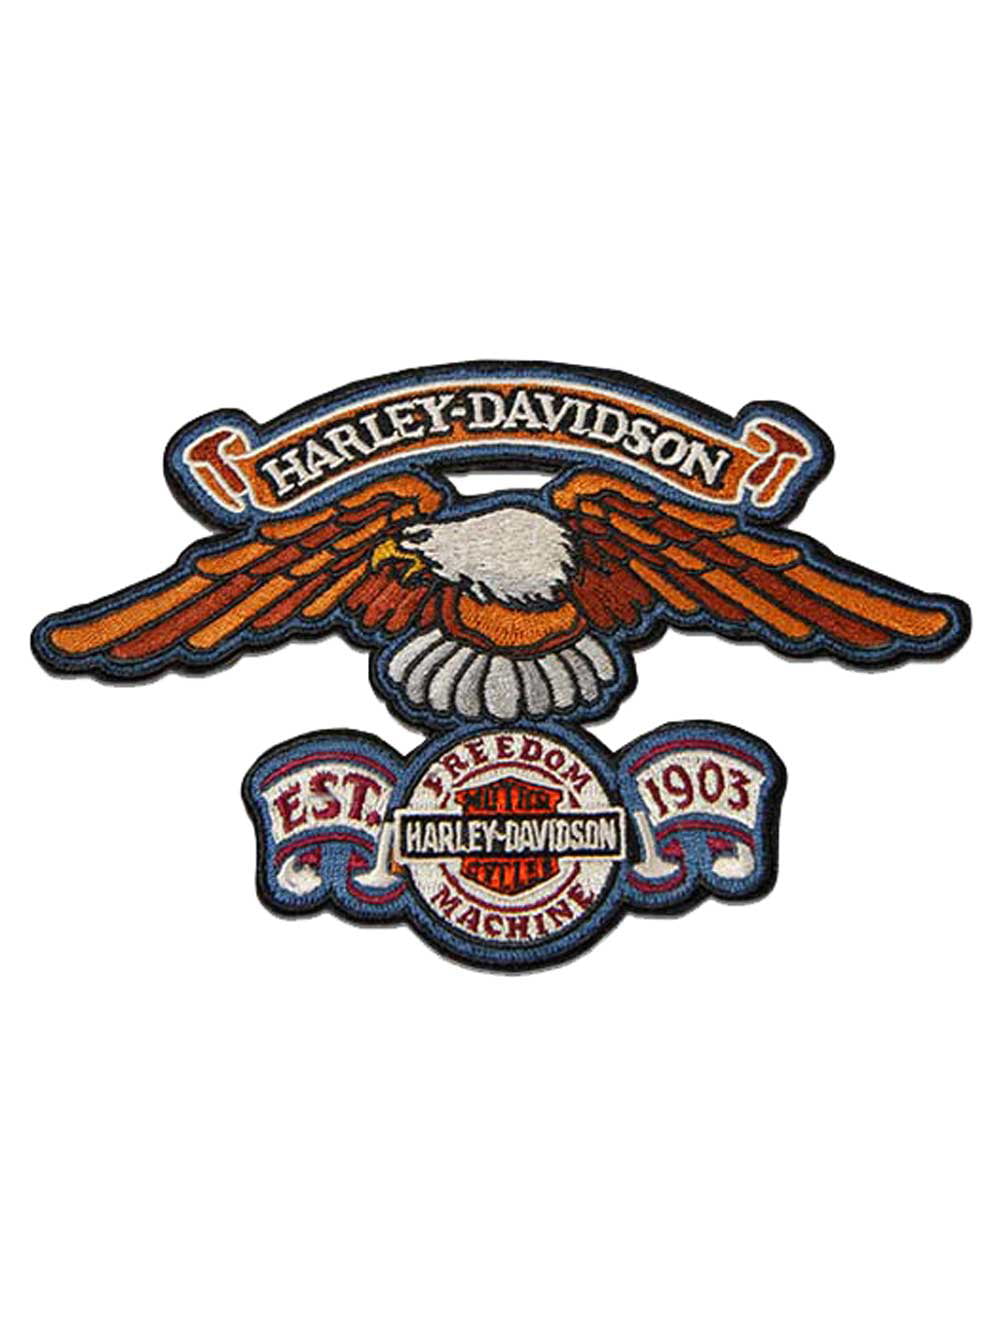 Harley Davidson Iron On Patch - Beyond Vision Mall